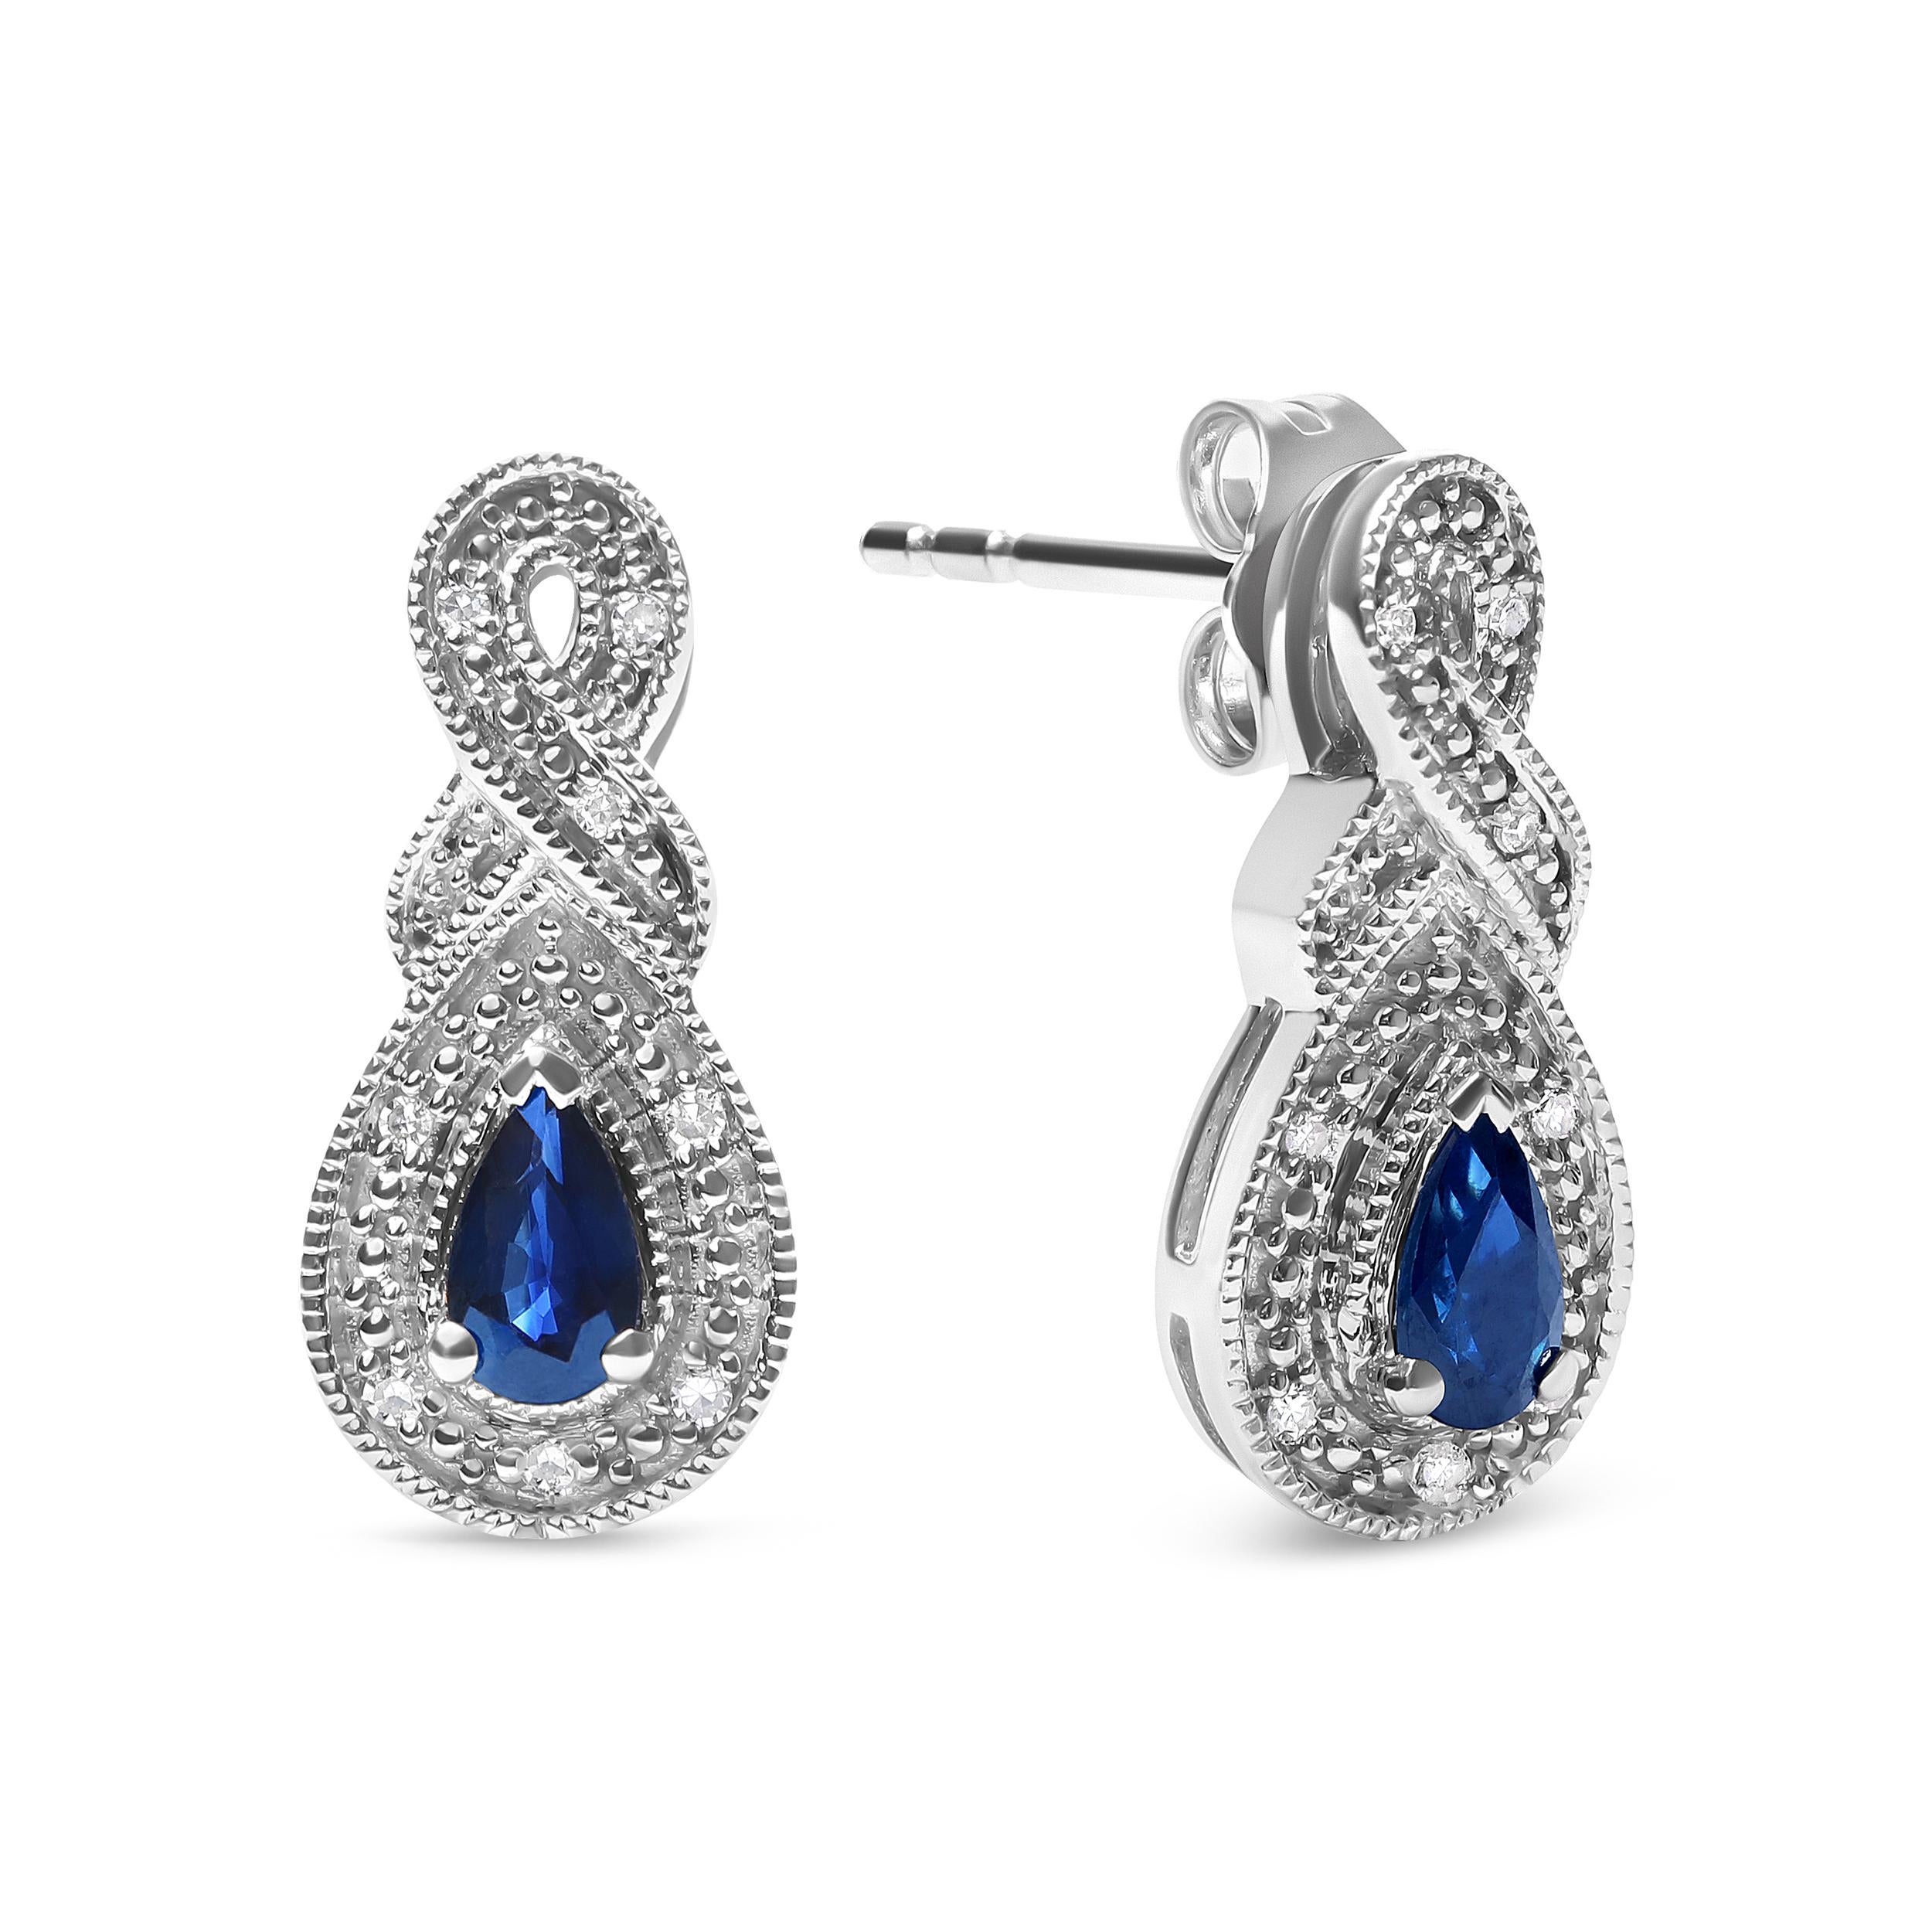 Prepare to dazzle in these stunning sapphire and diamond drop stud earrings, crafted from .925 sterling silver. Featuring two natural pear-shaped blue sapphires, each measuring 4.5 x 3mm, and accented by 14 round-cut natural diamonds, these earrings